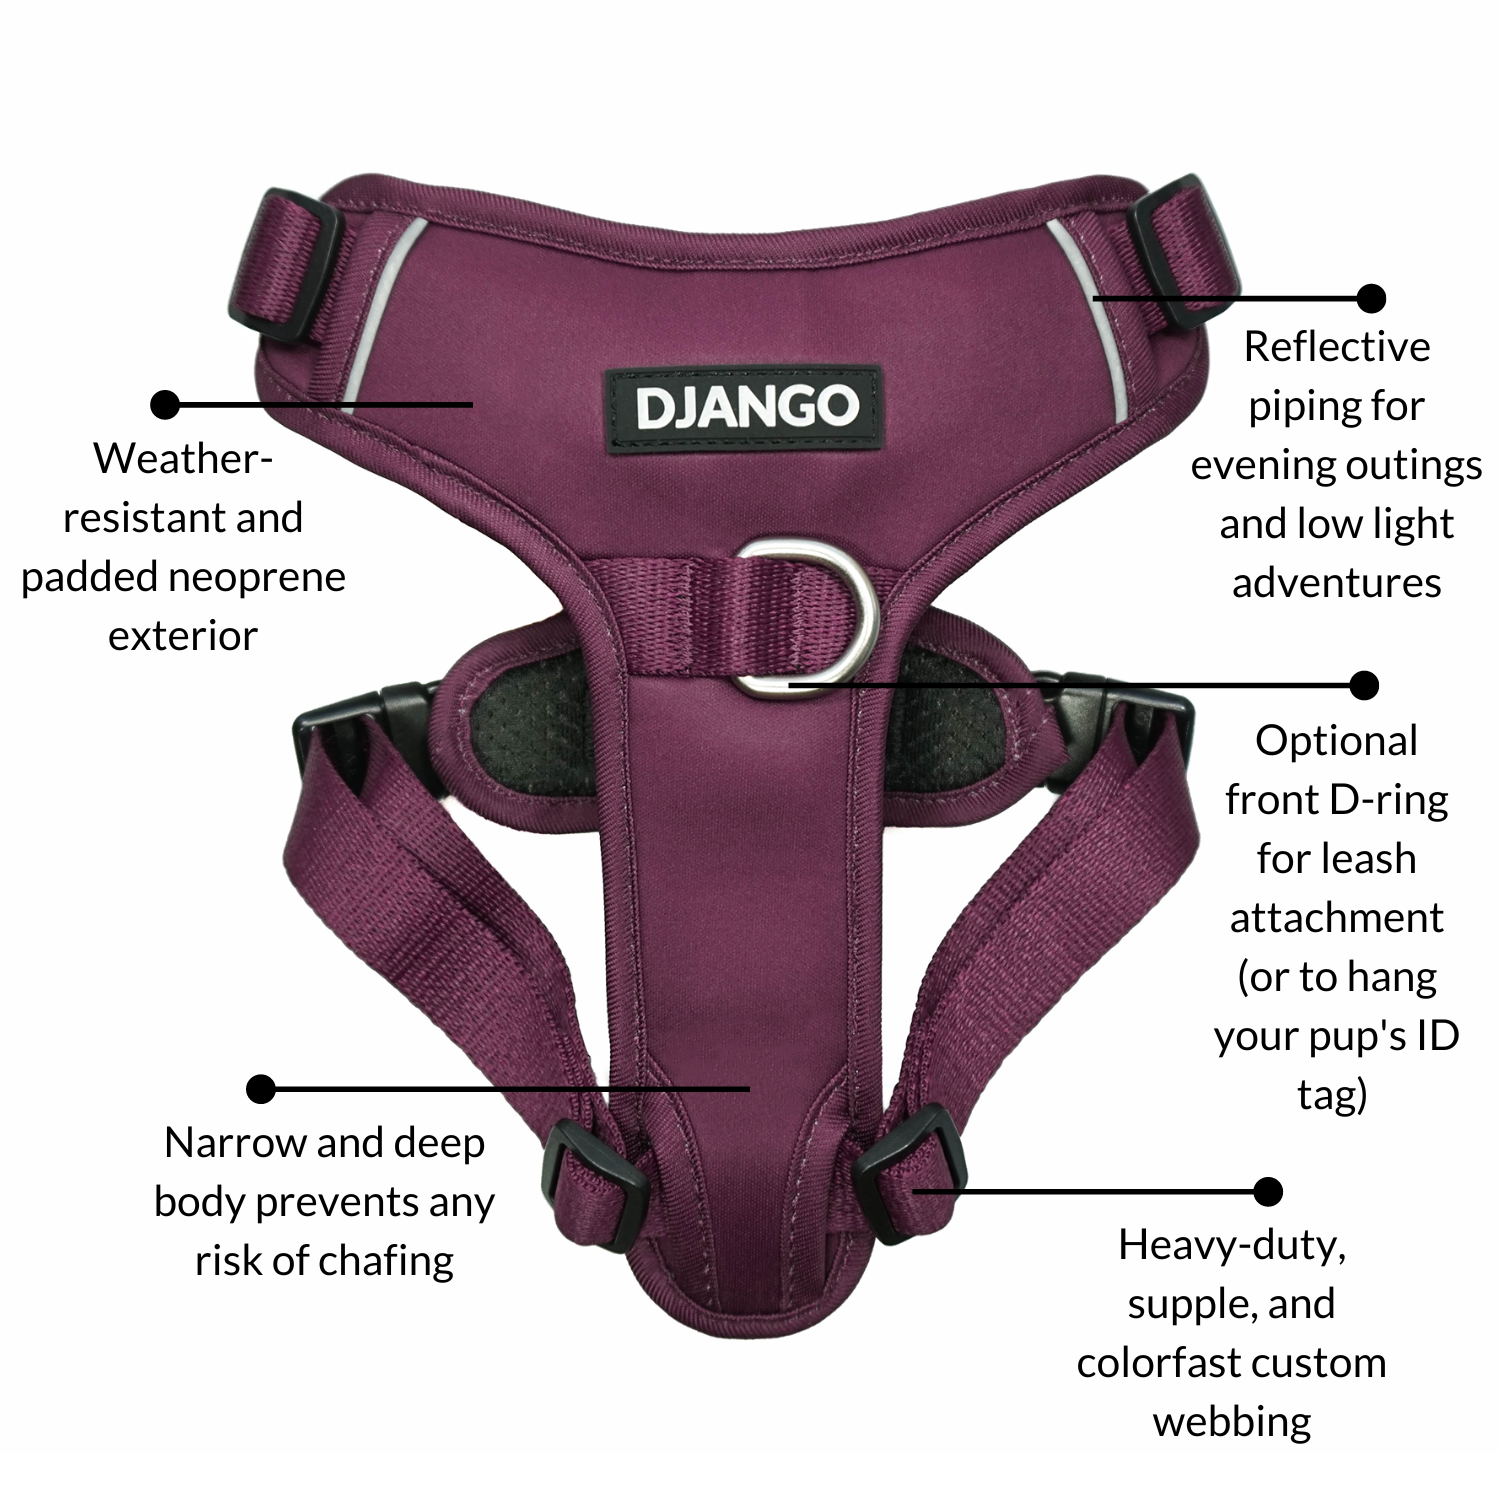 DJANGO Tahoe No Pull Dog Harness in Raspberry Purple - Key features include a weather-resistant and padded neoprene exterior, a narrow and deep harness body (to prevent the risk of chafing) reflective piping, and soft webbing. - djangobrand.com